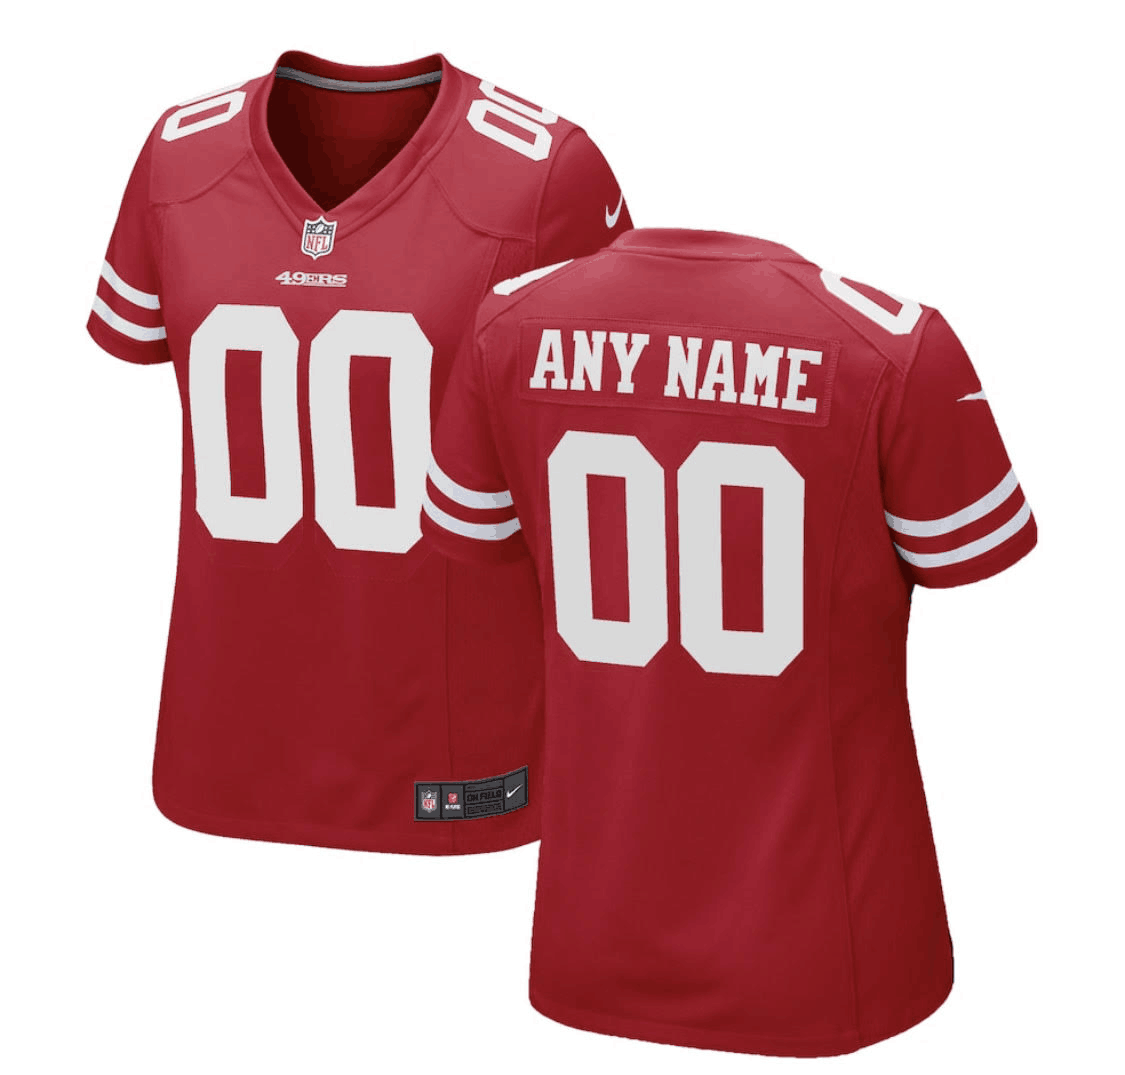 Women's San Francisco 49ers Customized Red Stitched Limited Jersey(Run Small）